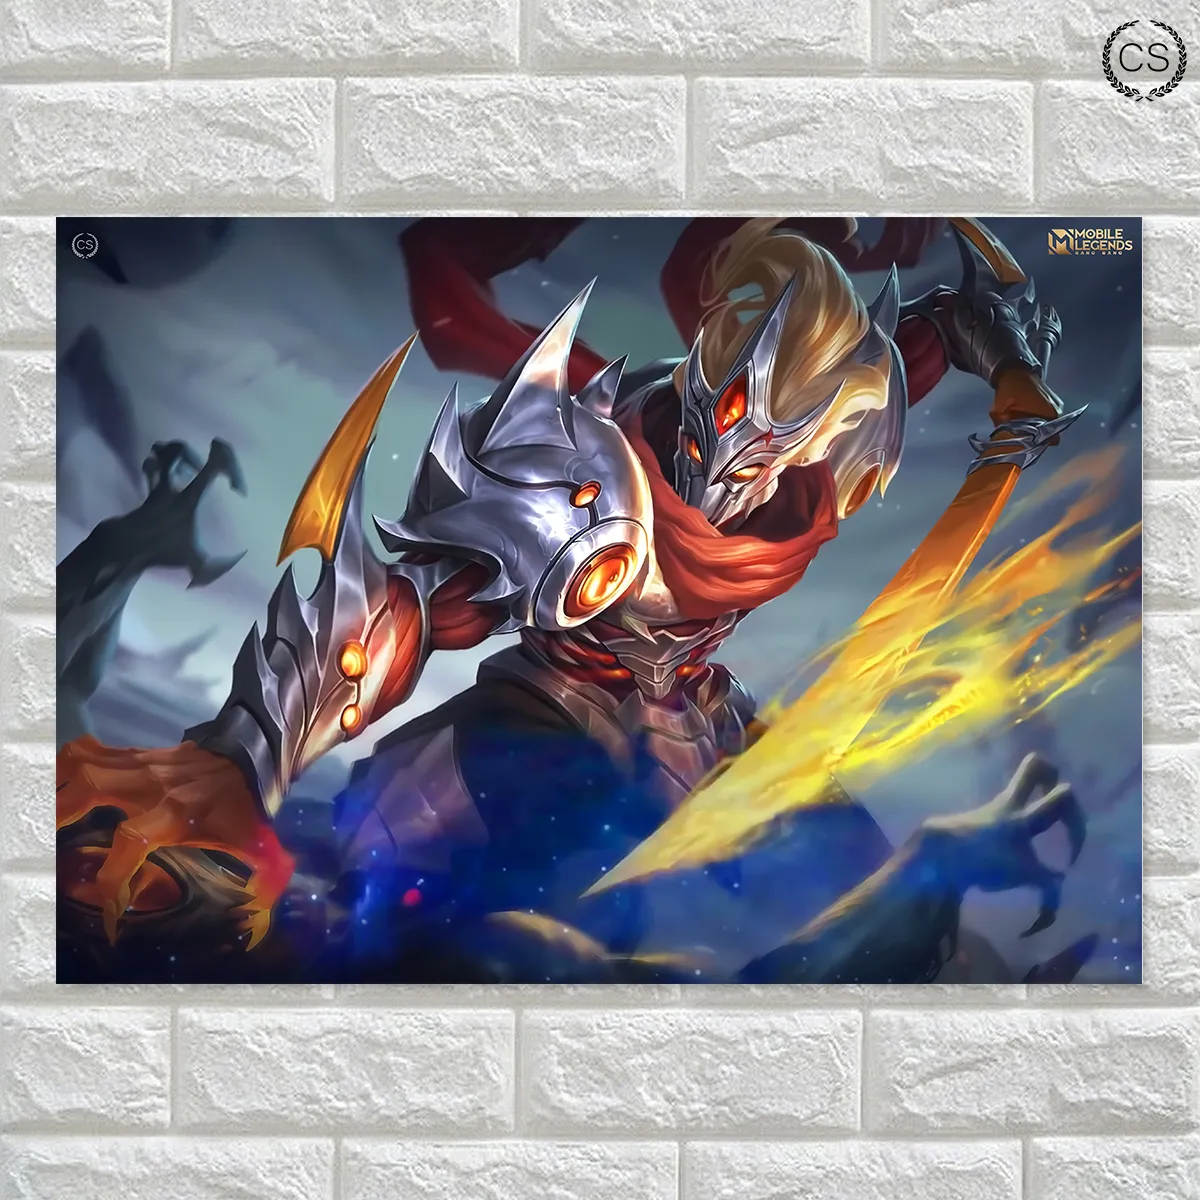 Hayabusa Mobile Legends Poster Wall Décor ( cm size) by Crenson |  Lazada PH